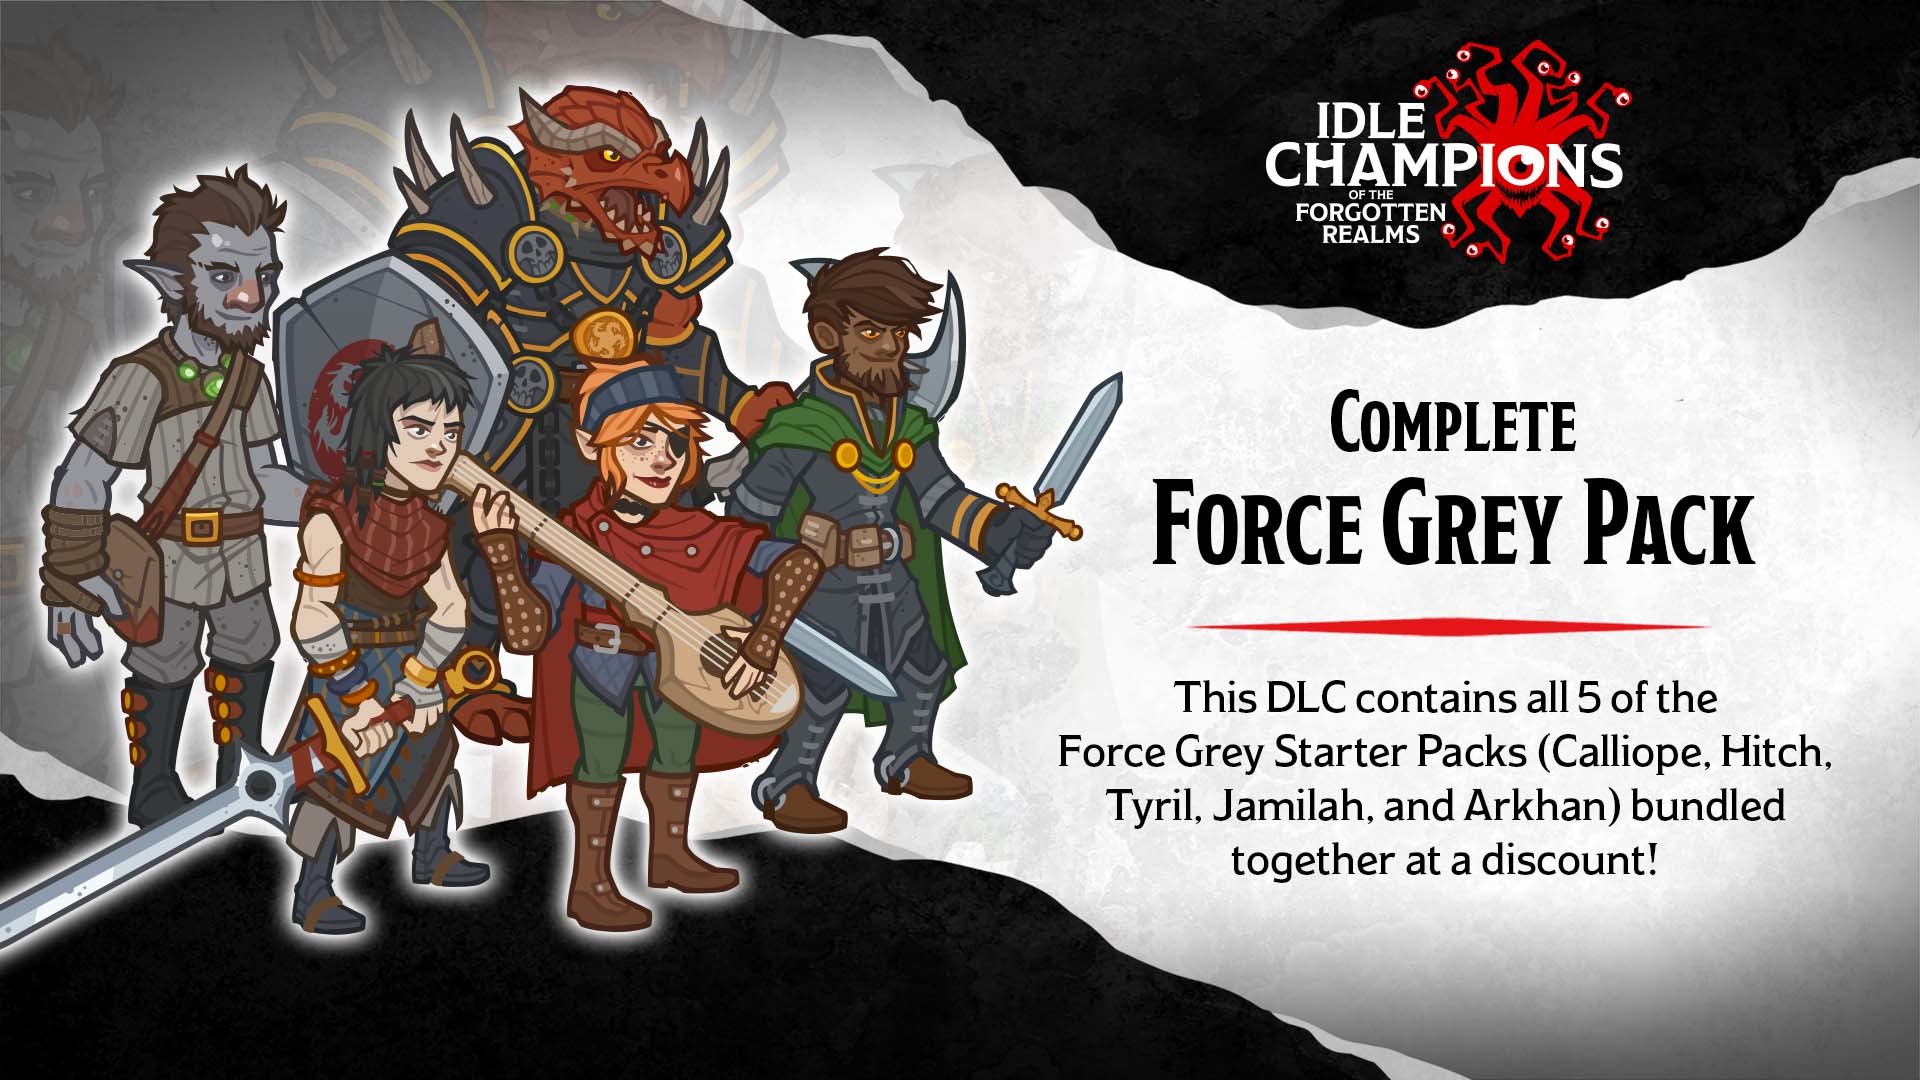 Idle Champions - Complete Force Grey Pack Featured Screenshot #1